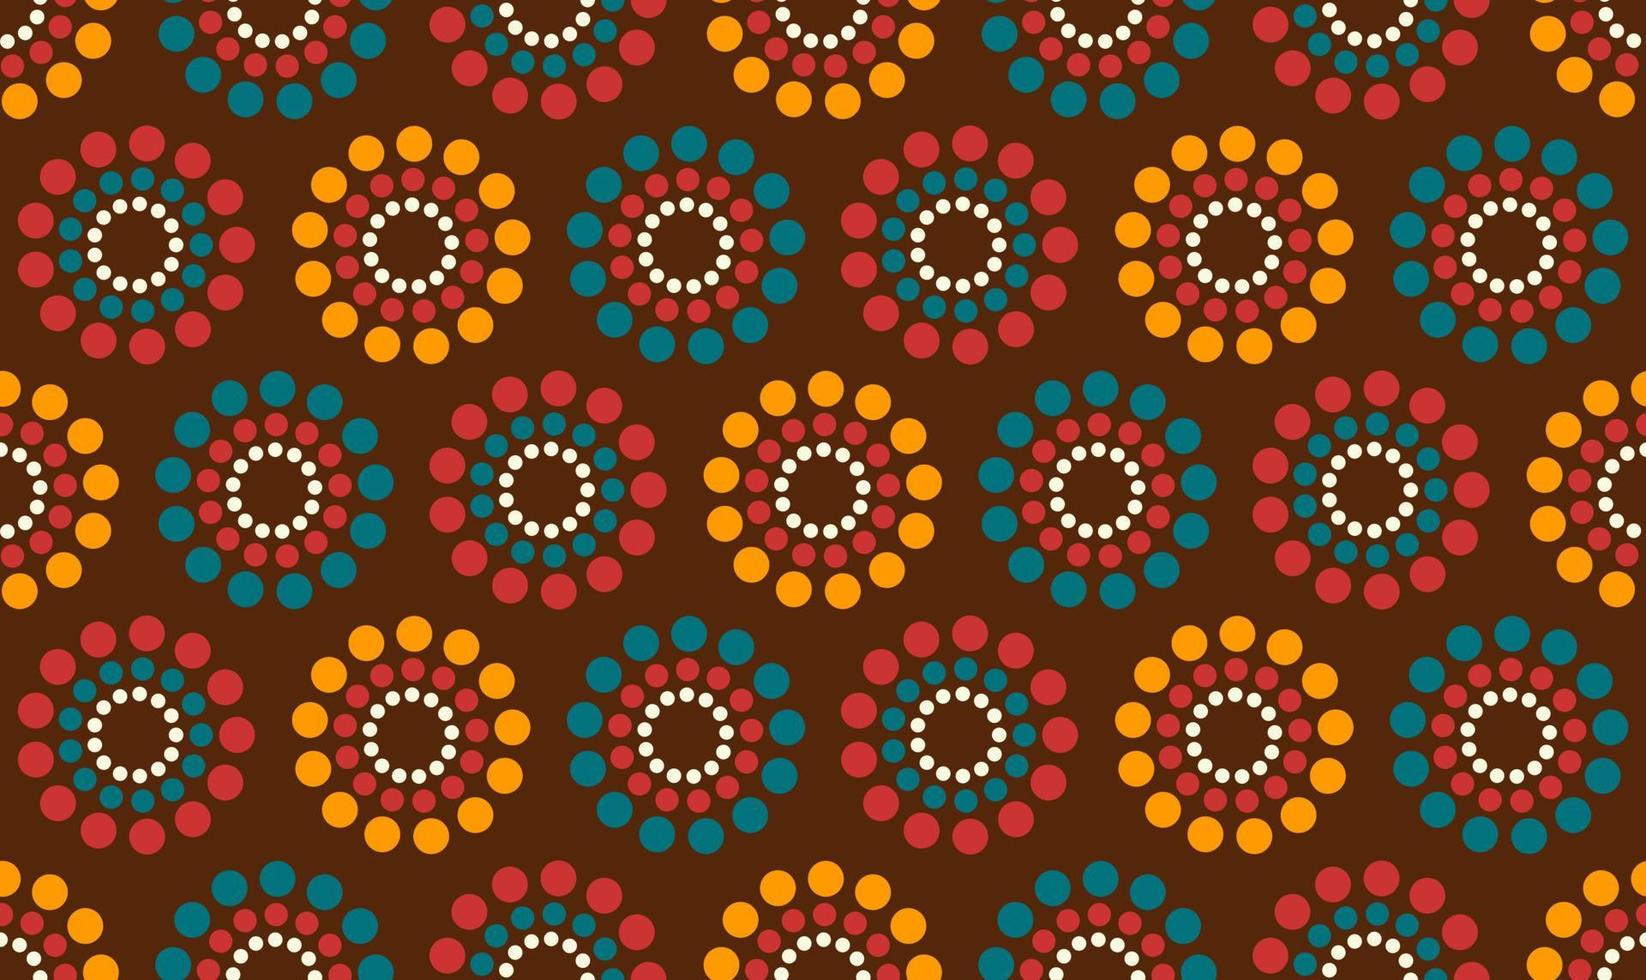 Mid century modern seamless pattern with circles of dots in brown, orange, red and turquoise. 60s and 70s aesthetic style for home decor, textile, wallpaper and wrapping paper vector